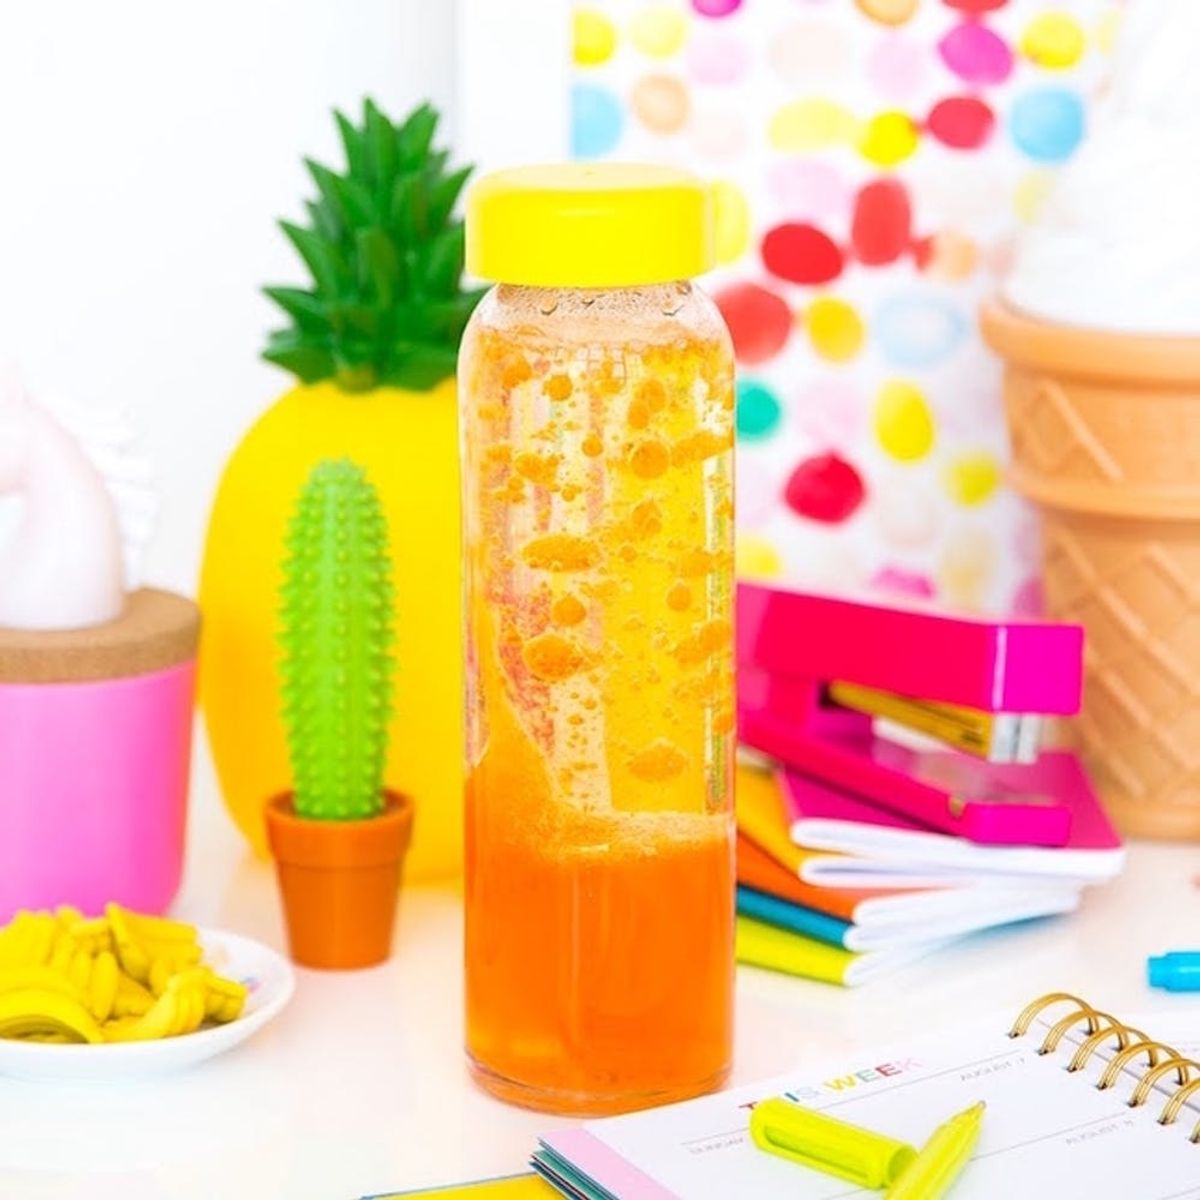 What to Make This Weekend: DIY Lava Lamps, Pineapple Cutting Board + More